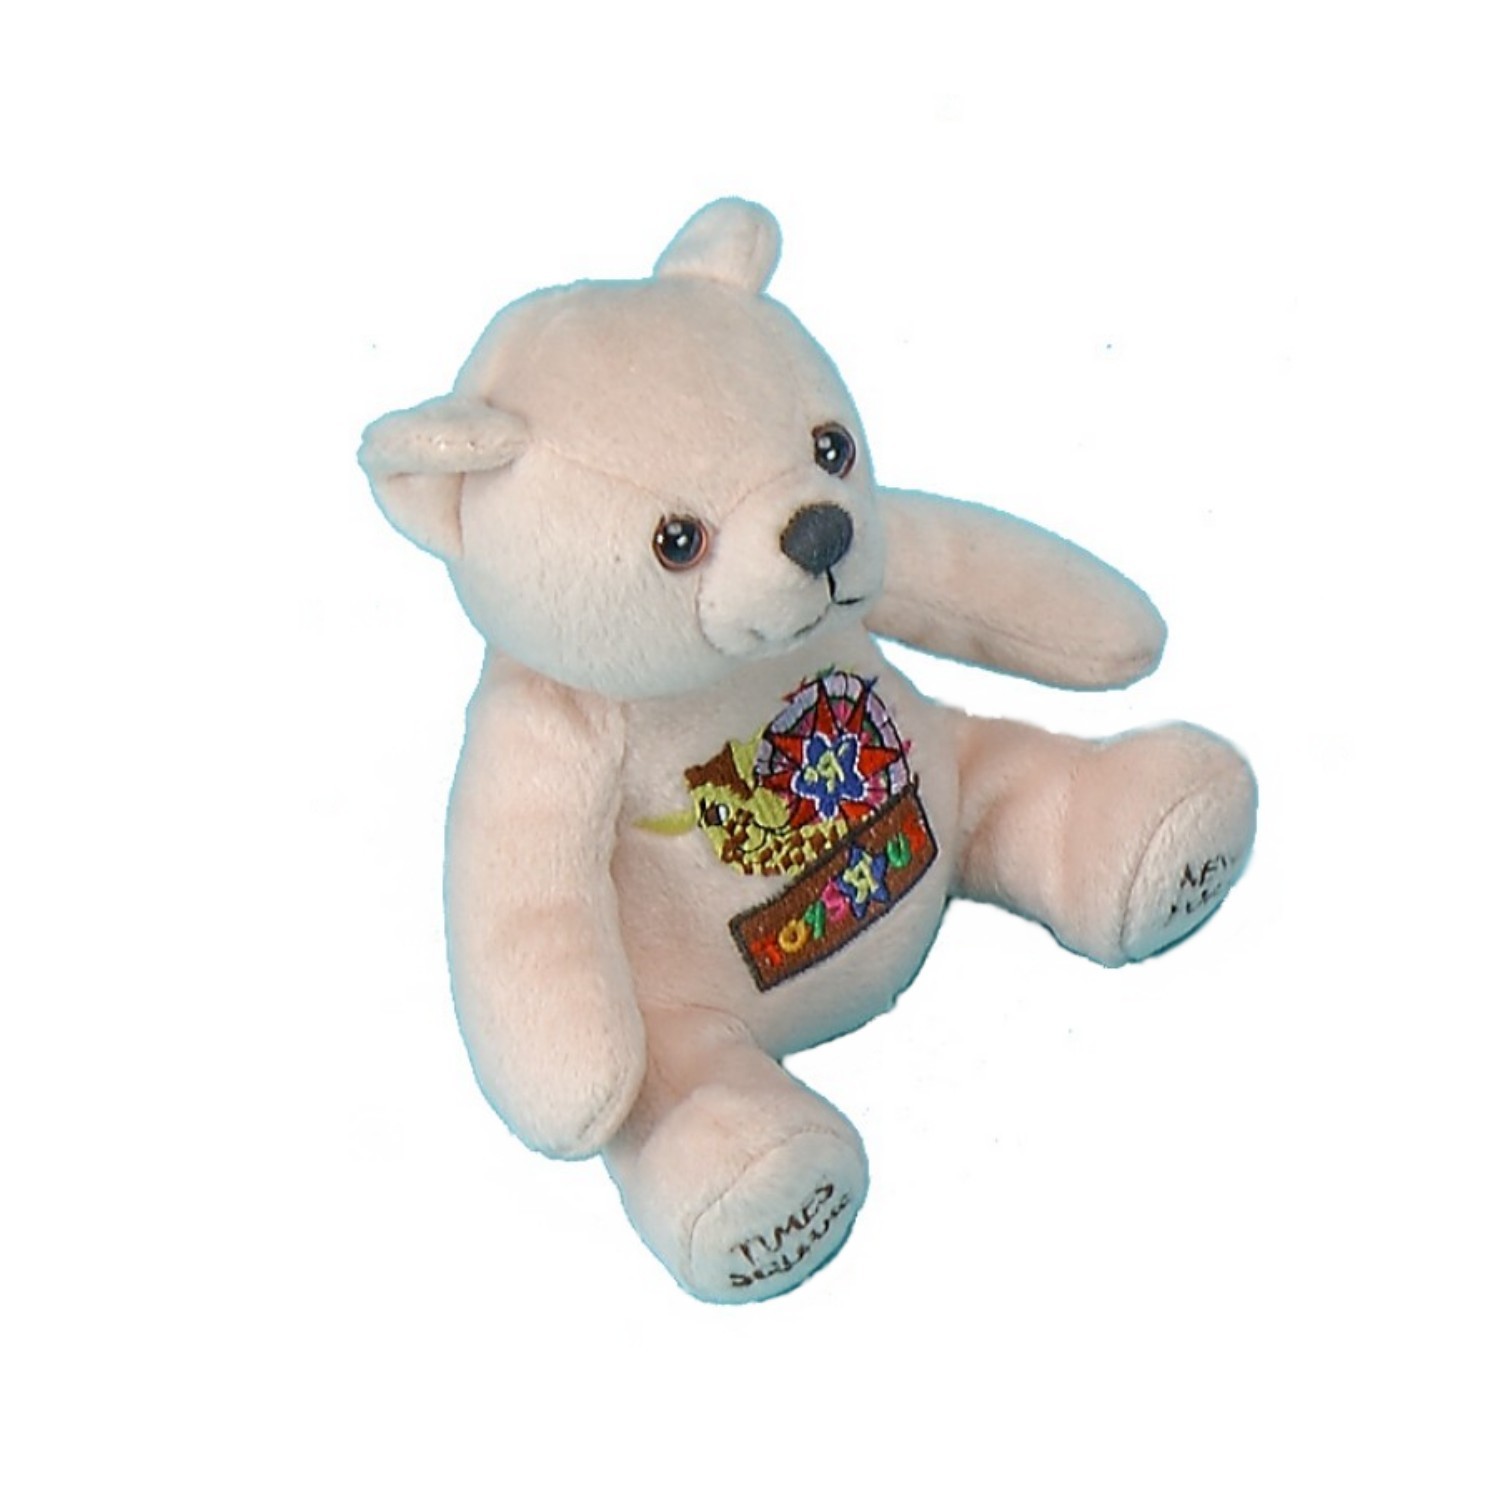 Tan bear stuffed plush toys inside with plastic particles